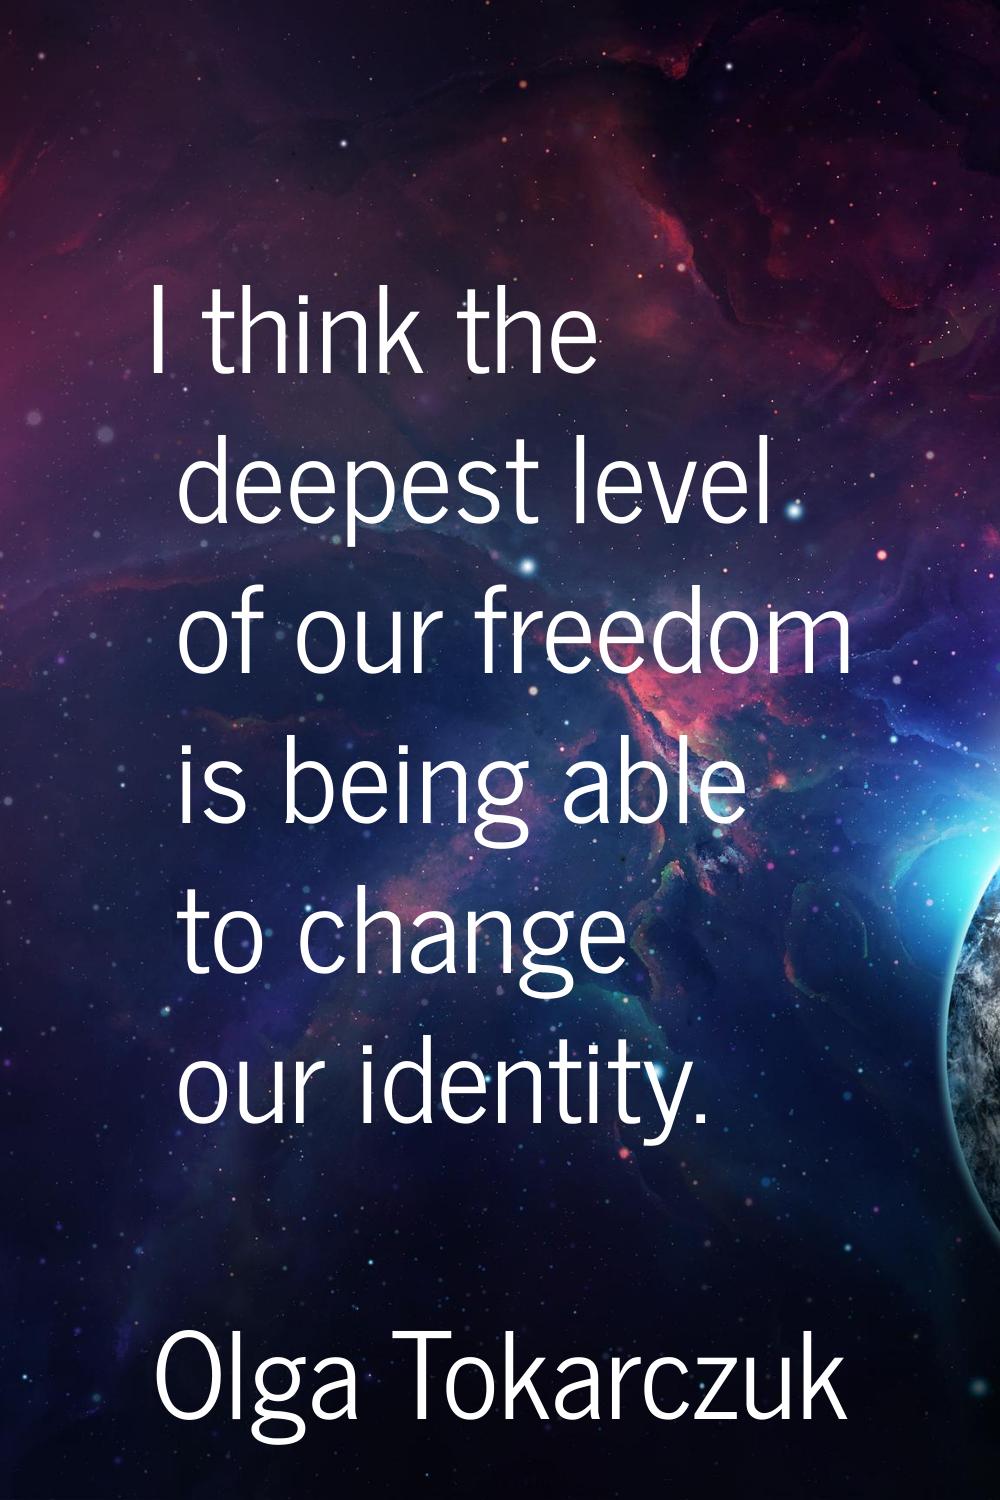 I think the deepest level of our freedom is being able to change our identity.